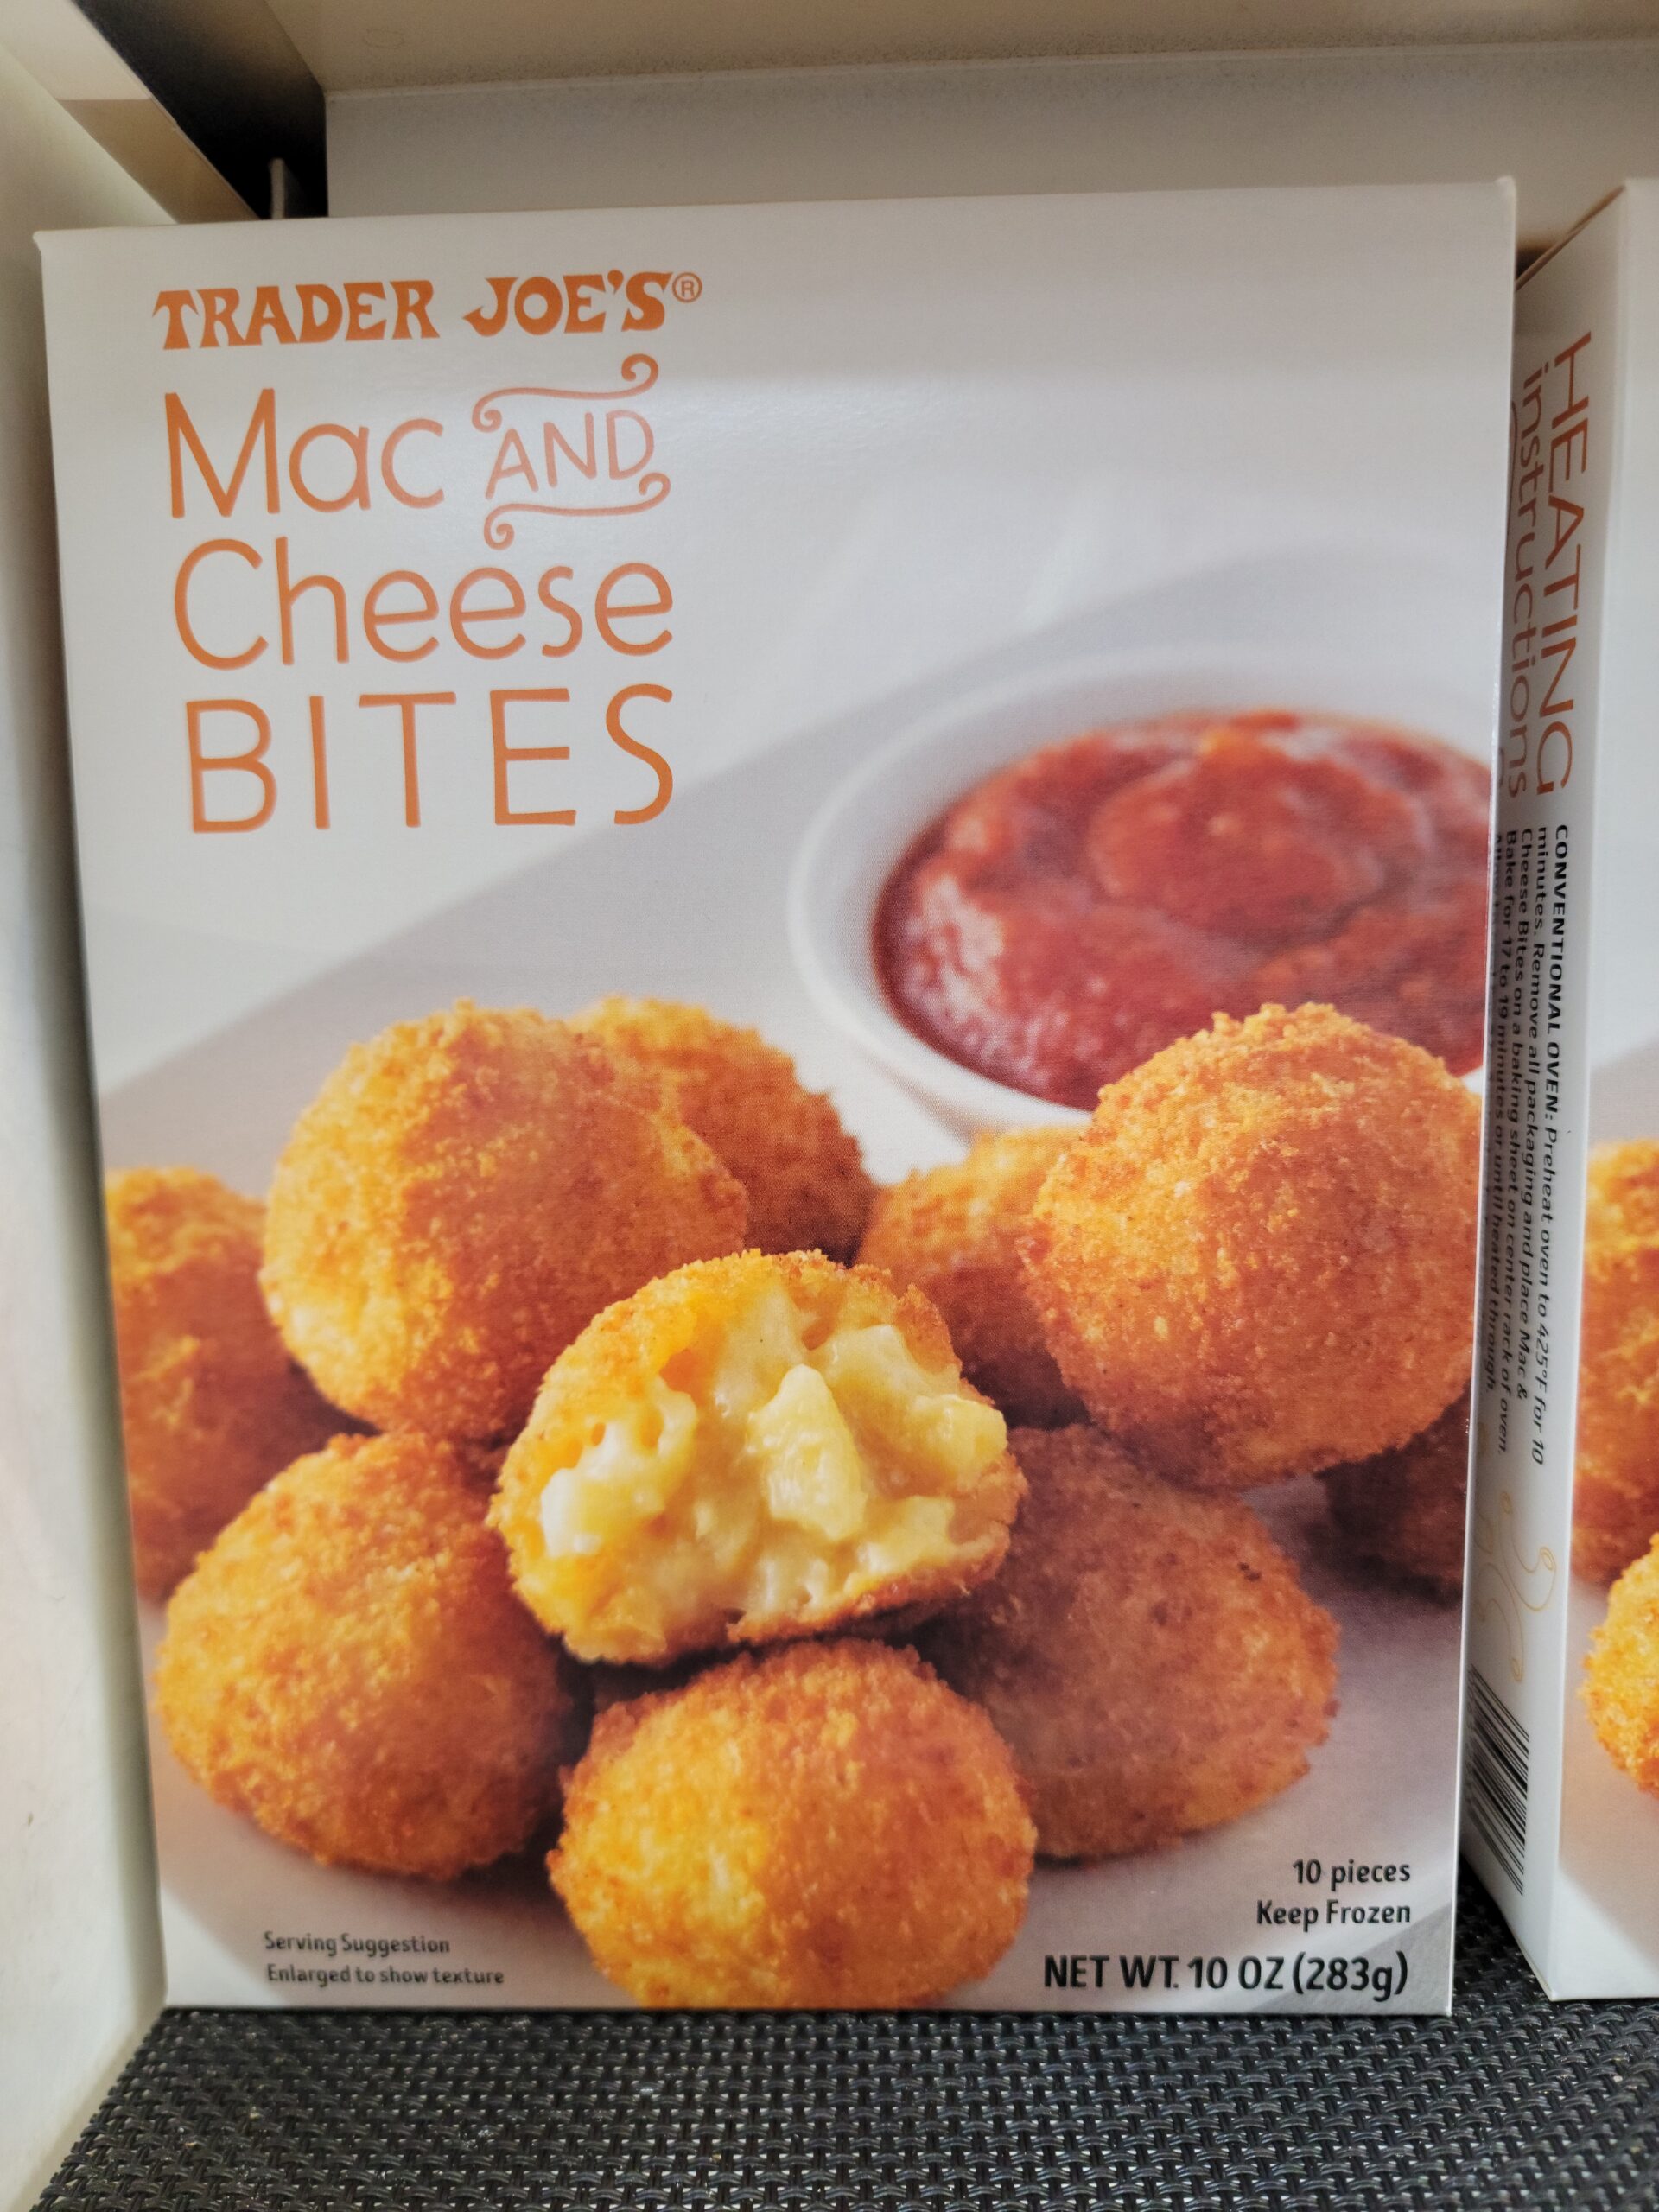 A box of Trader Joe's Fried Mac and Cheese bites for inspiration.